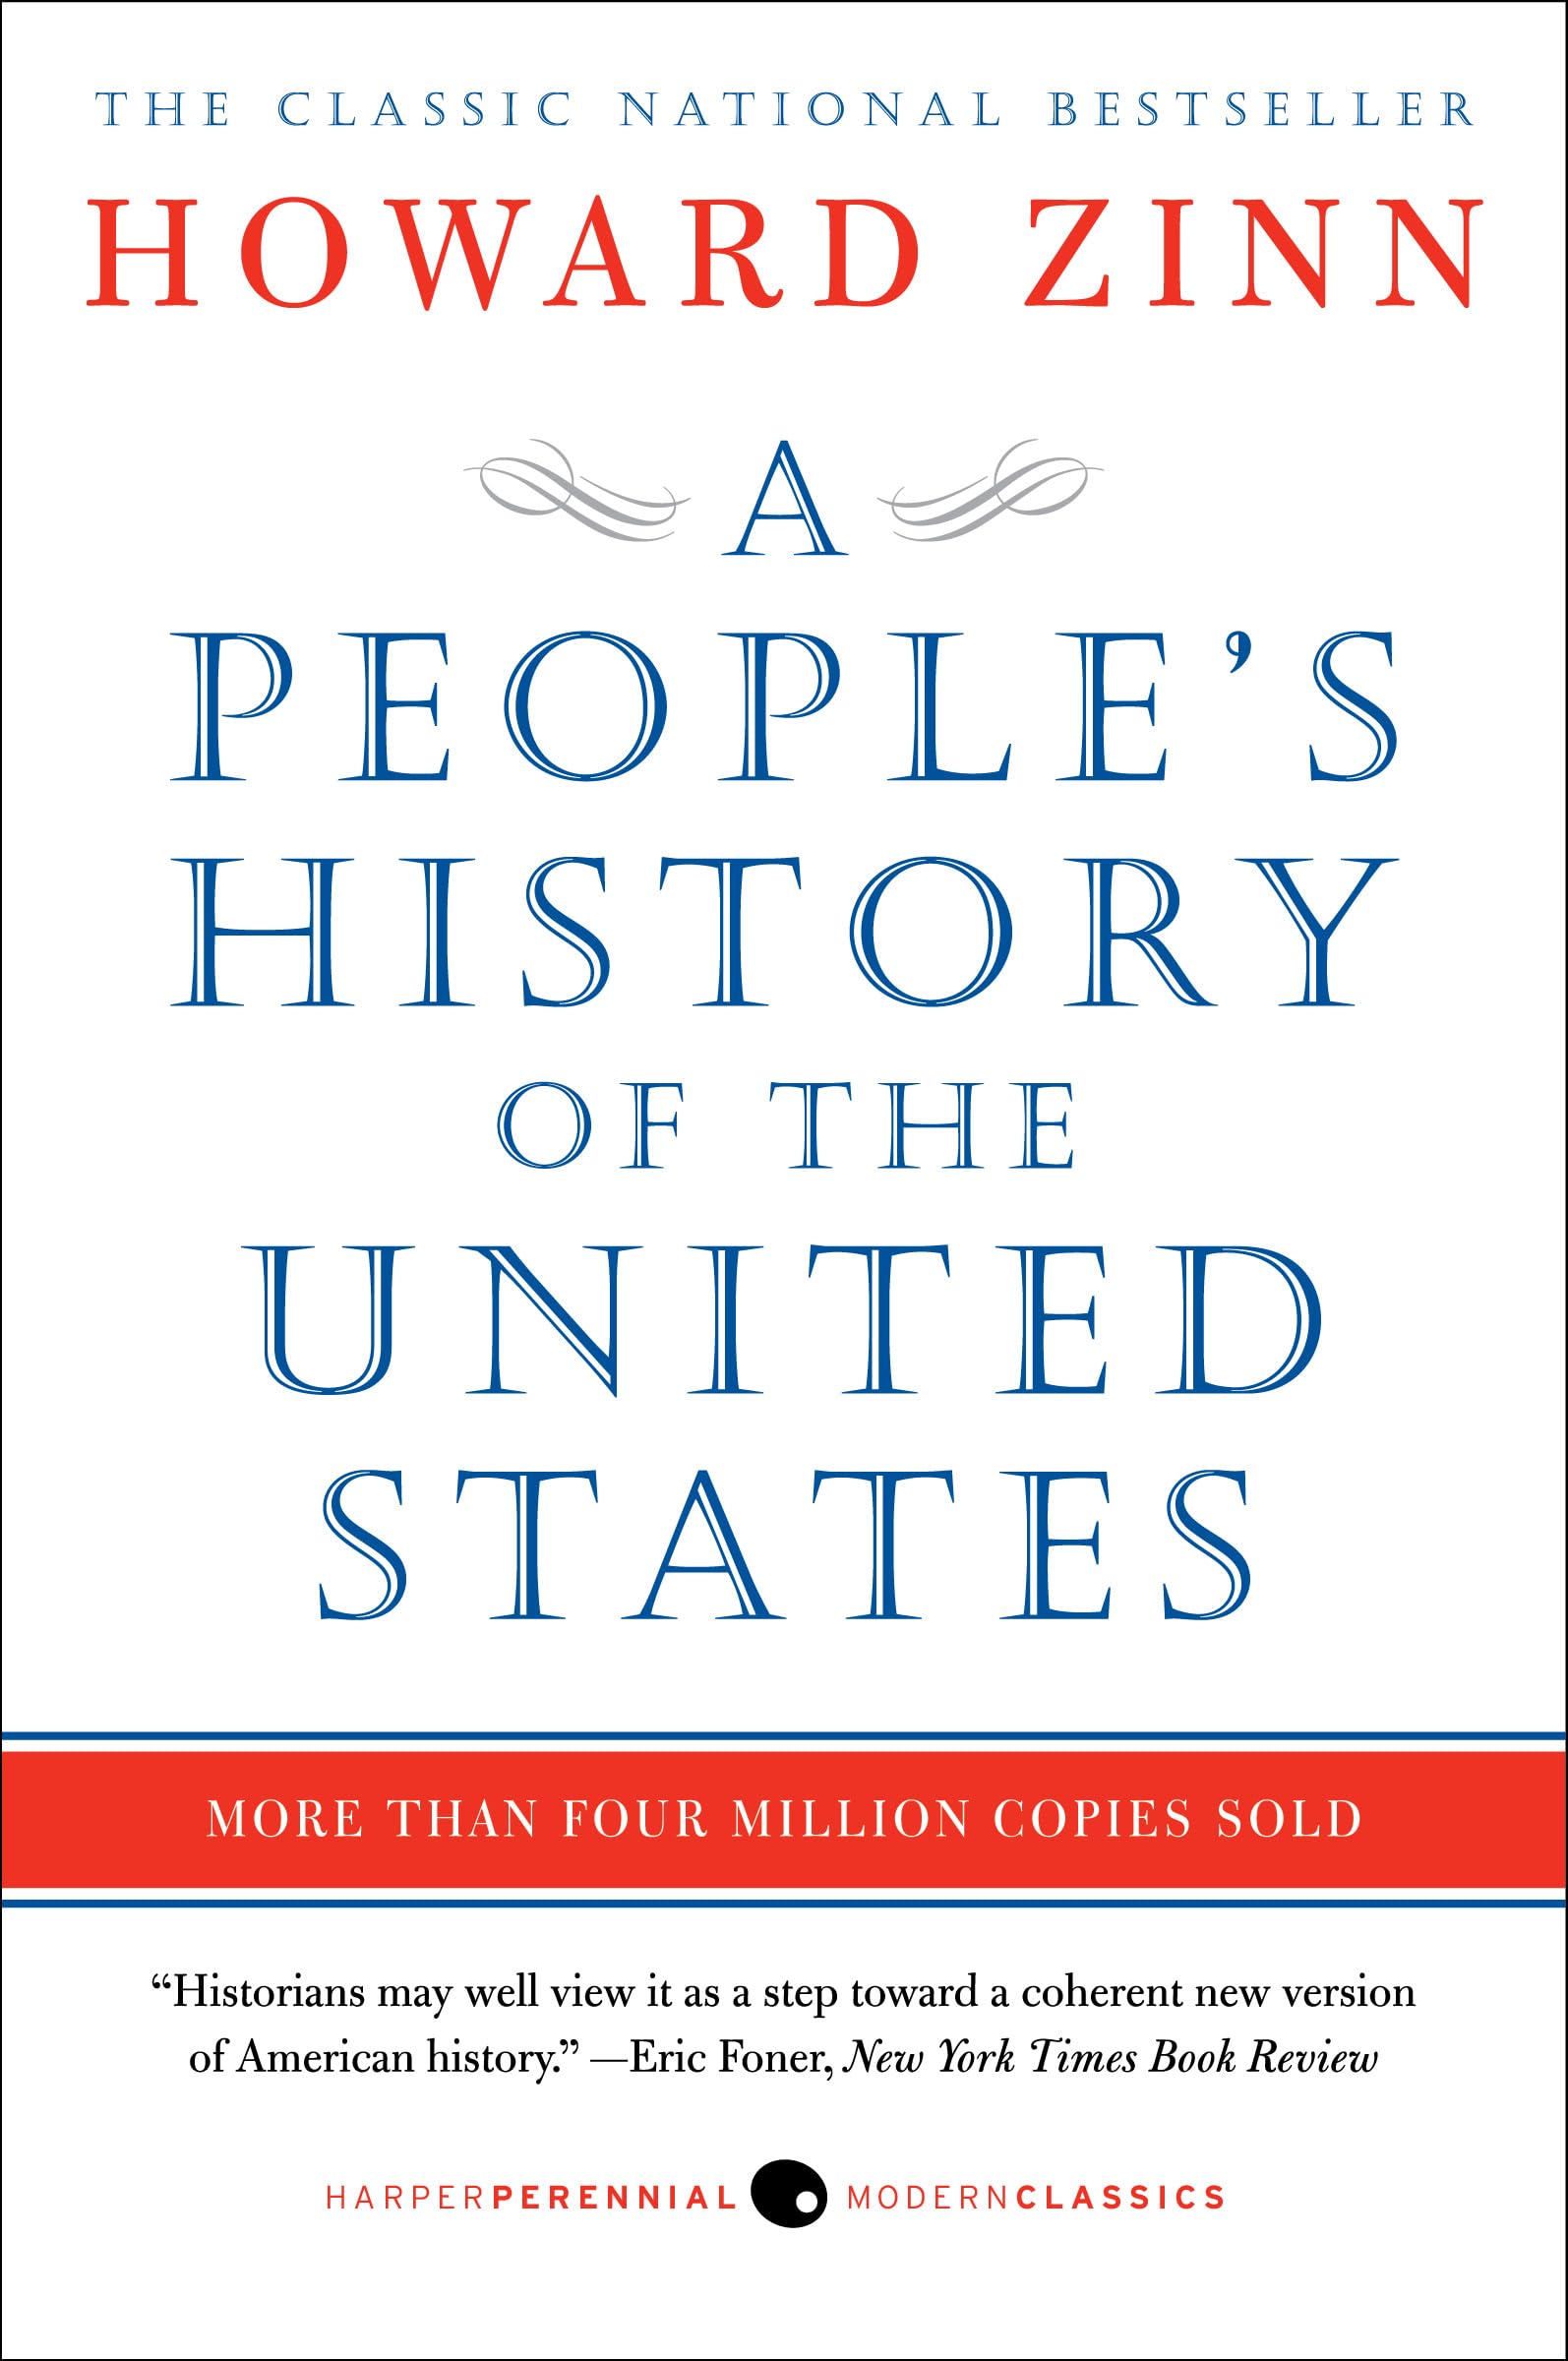 A People's History of the United States by Zinn, Howard